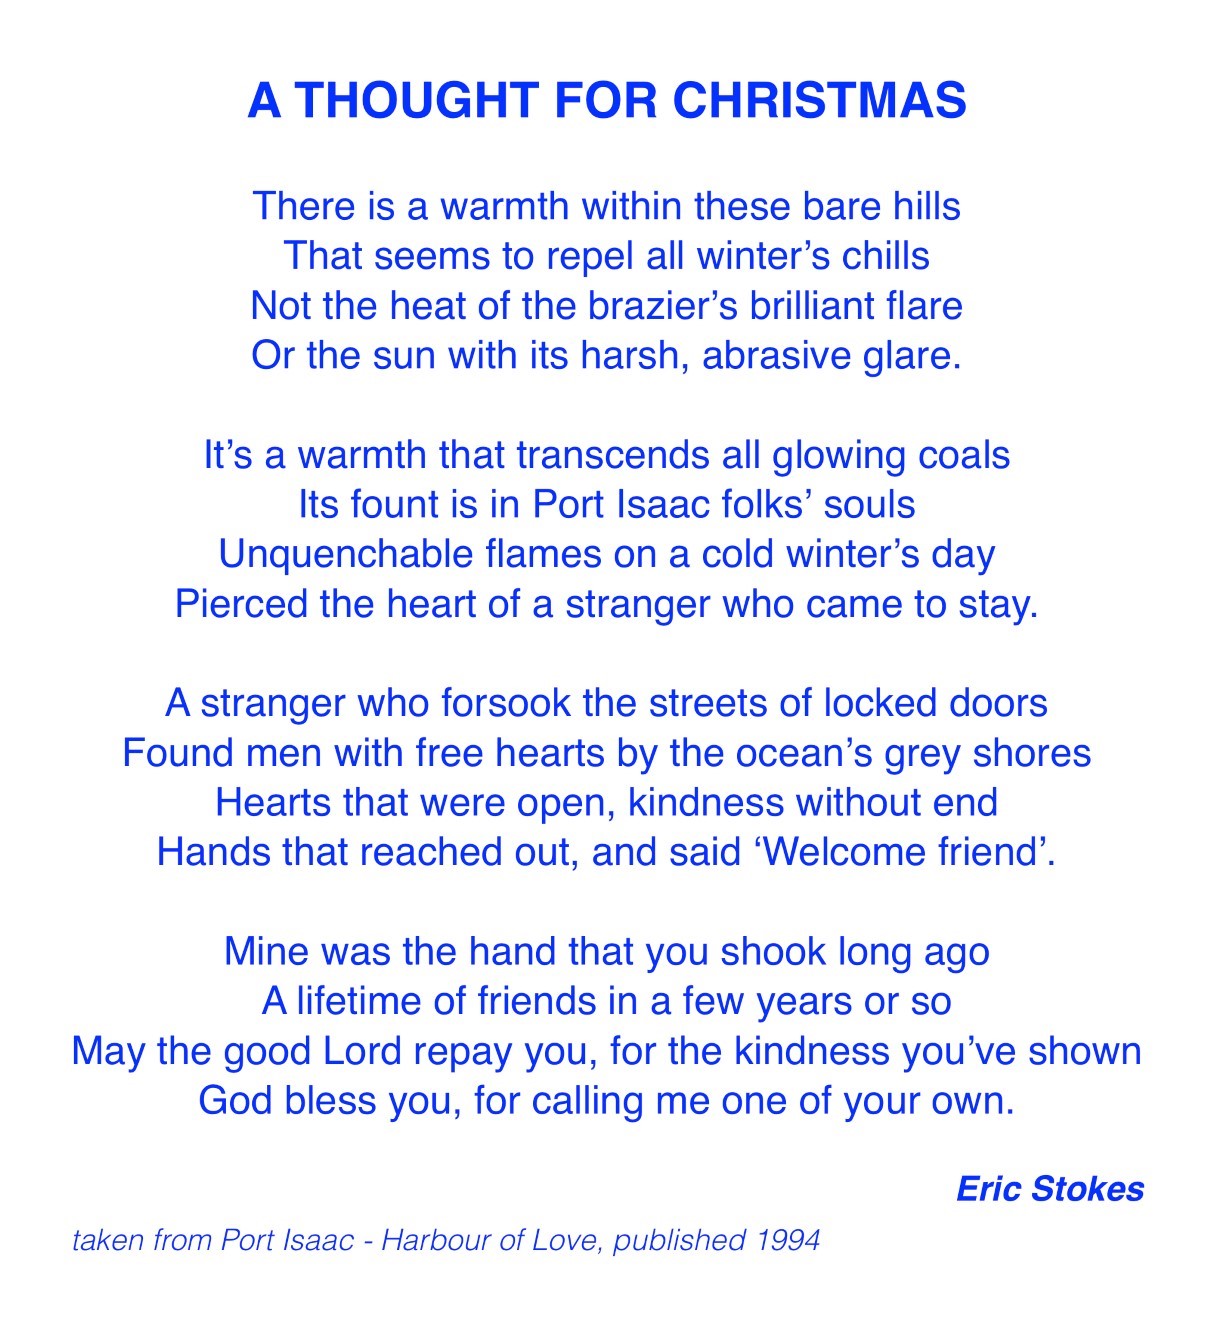 A Thought for Christmas